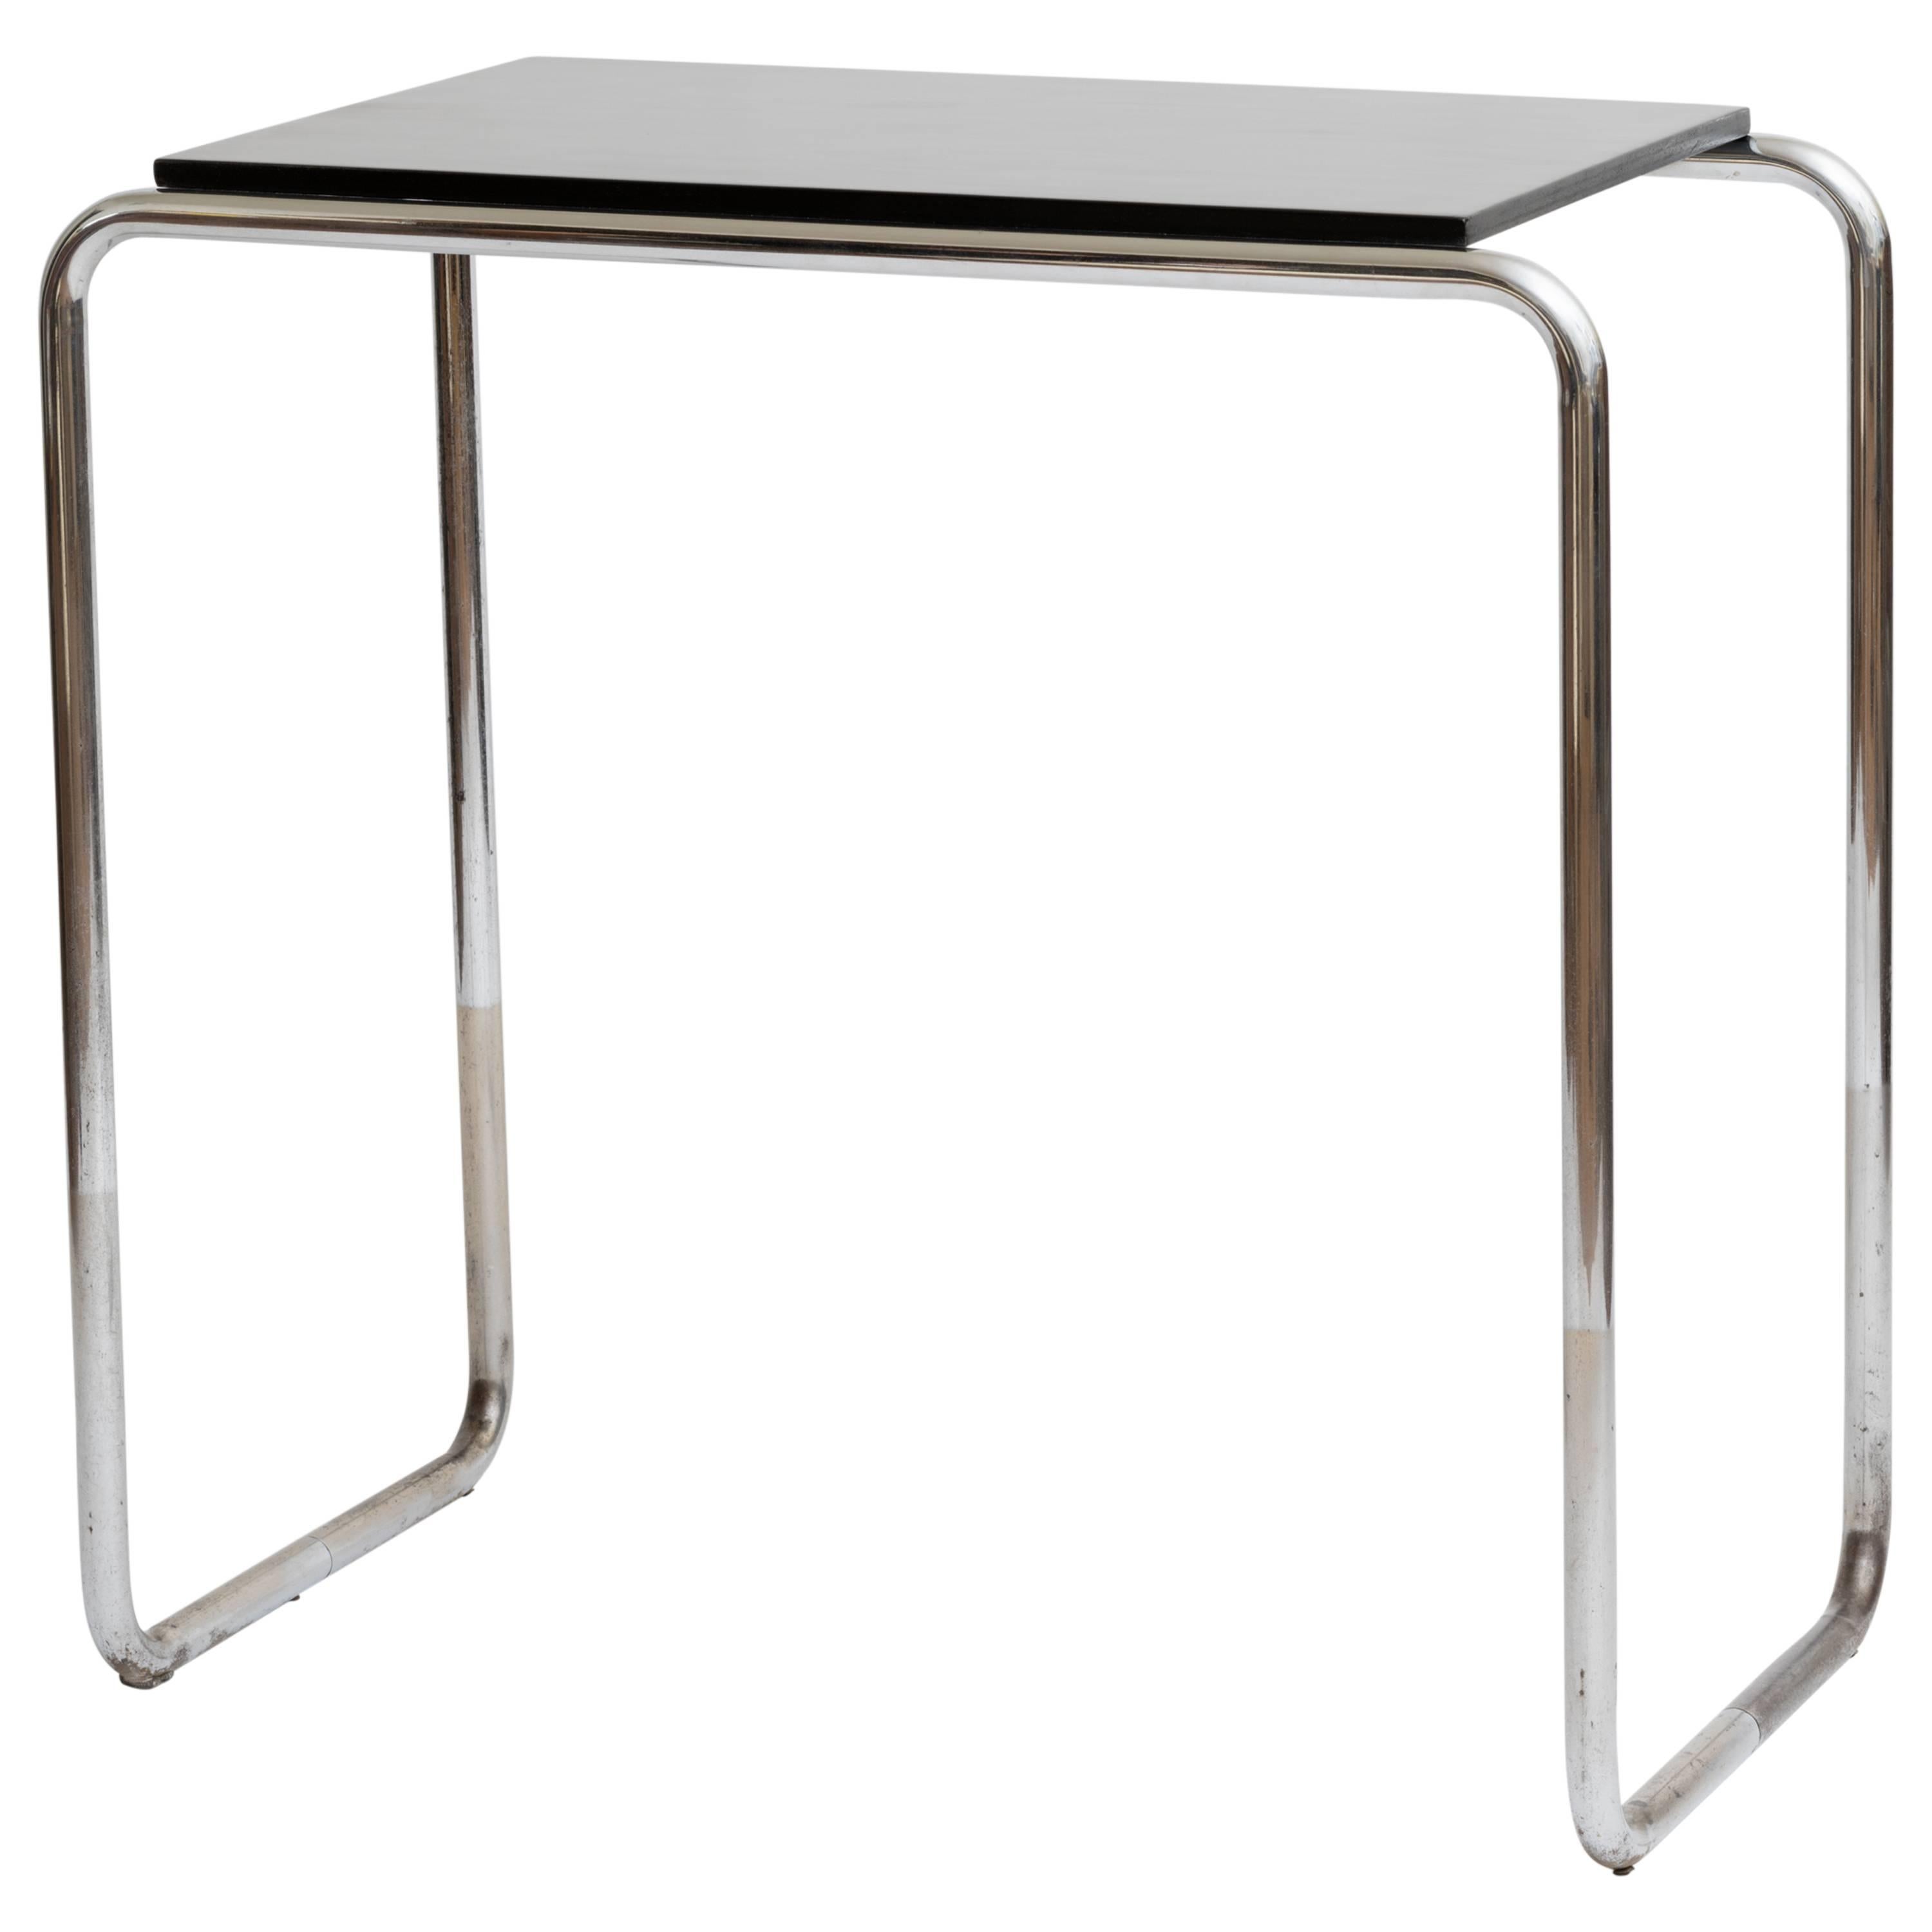 1930s Lacquered Bar Console Table in the Style of Marcel Breuer